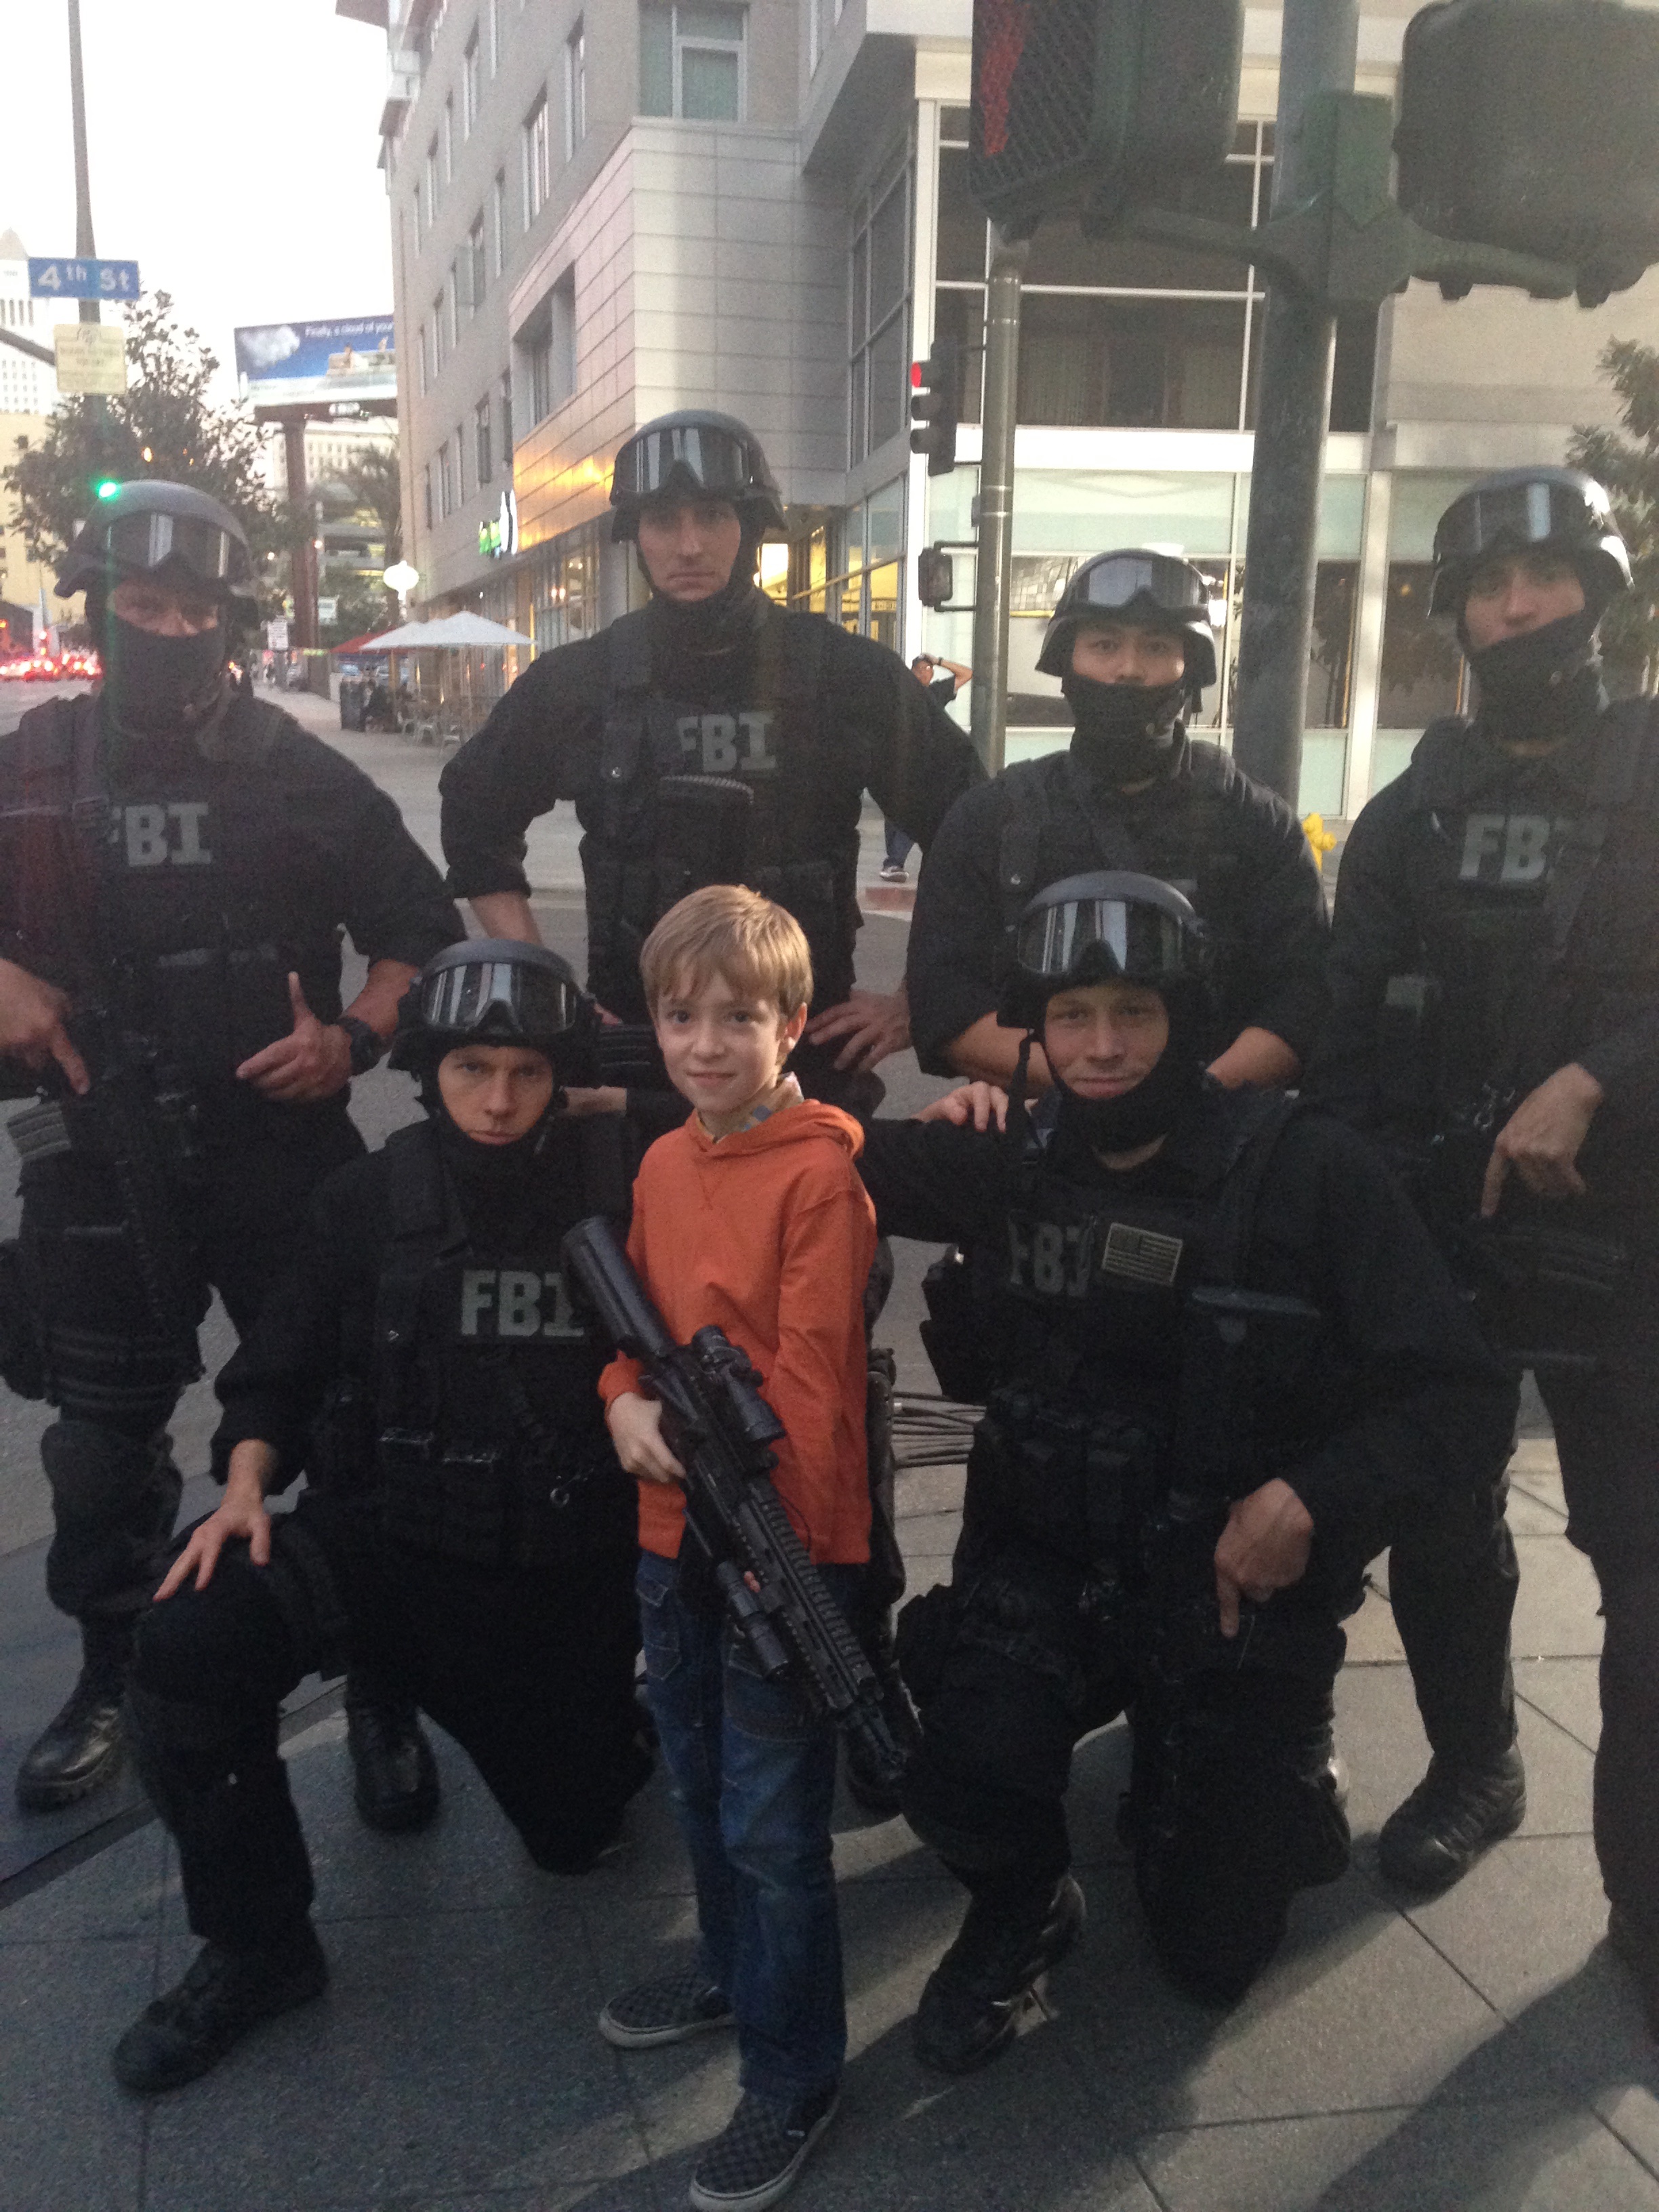 NCIS Los Angeles on set Connor Kalopsis with SWAT